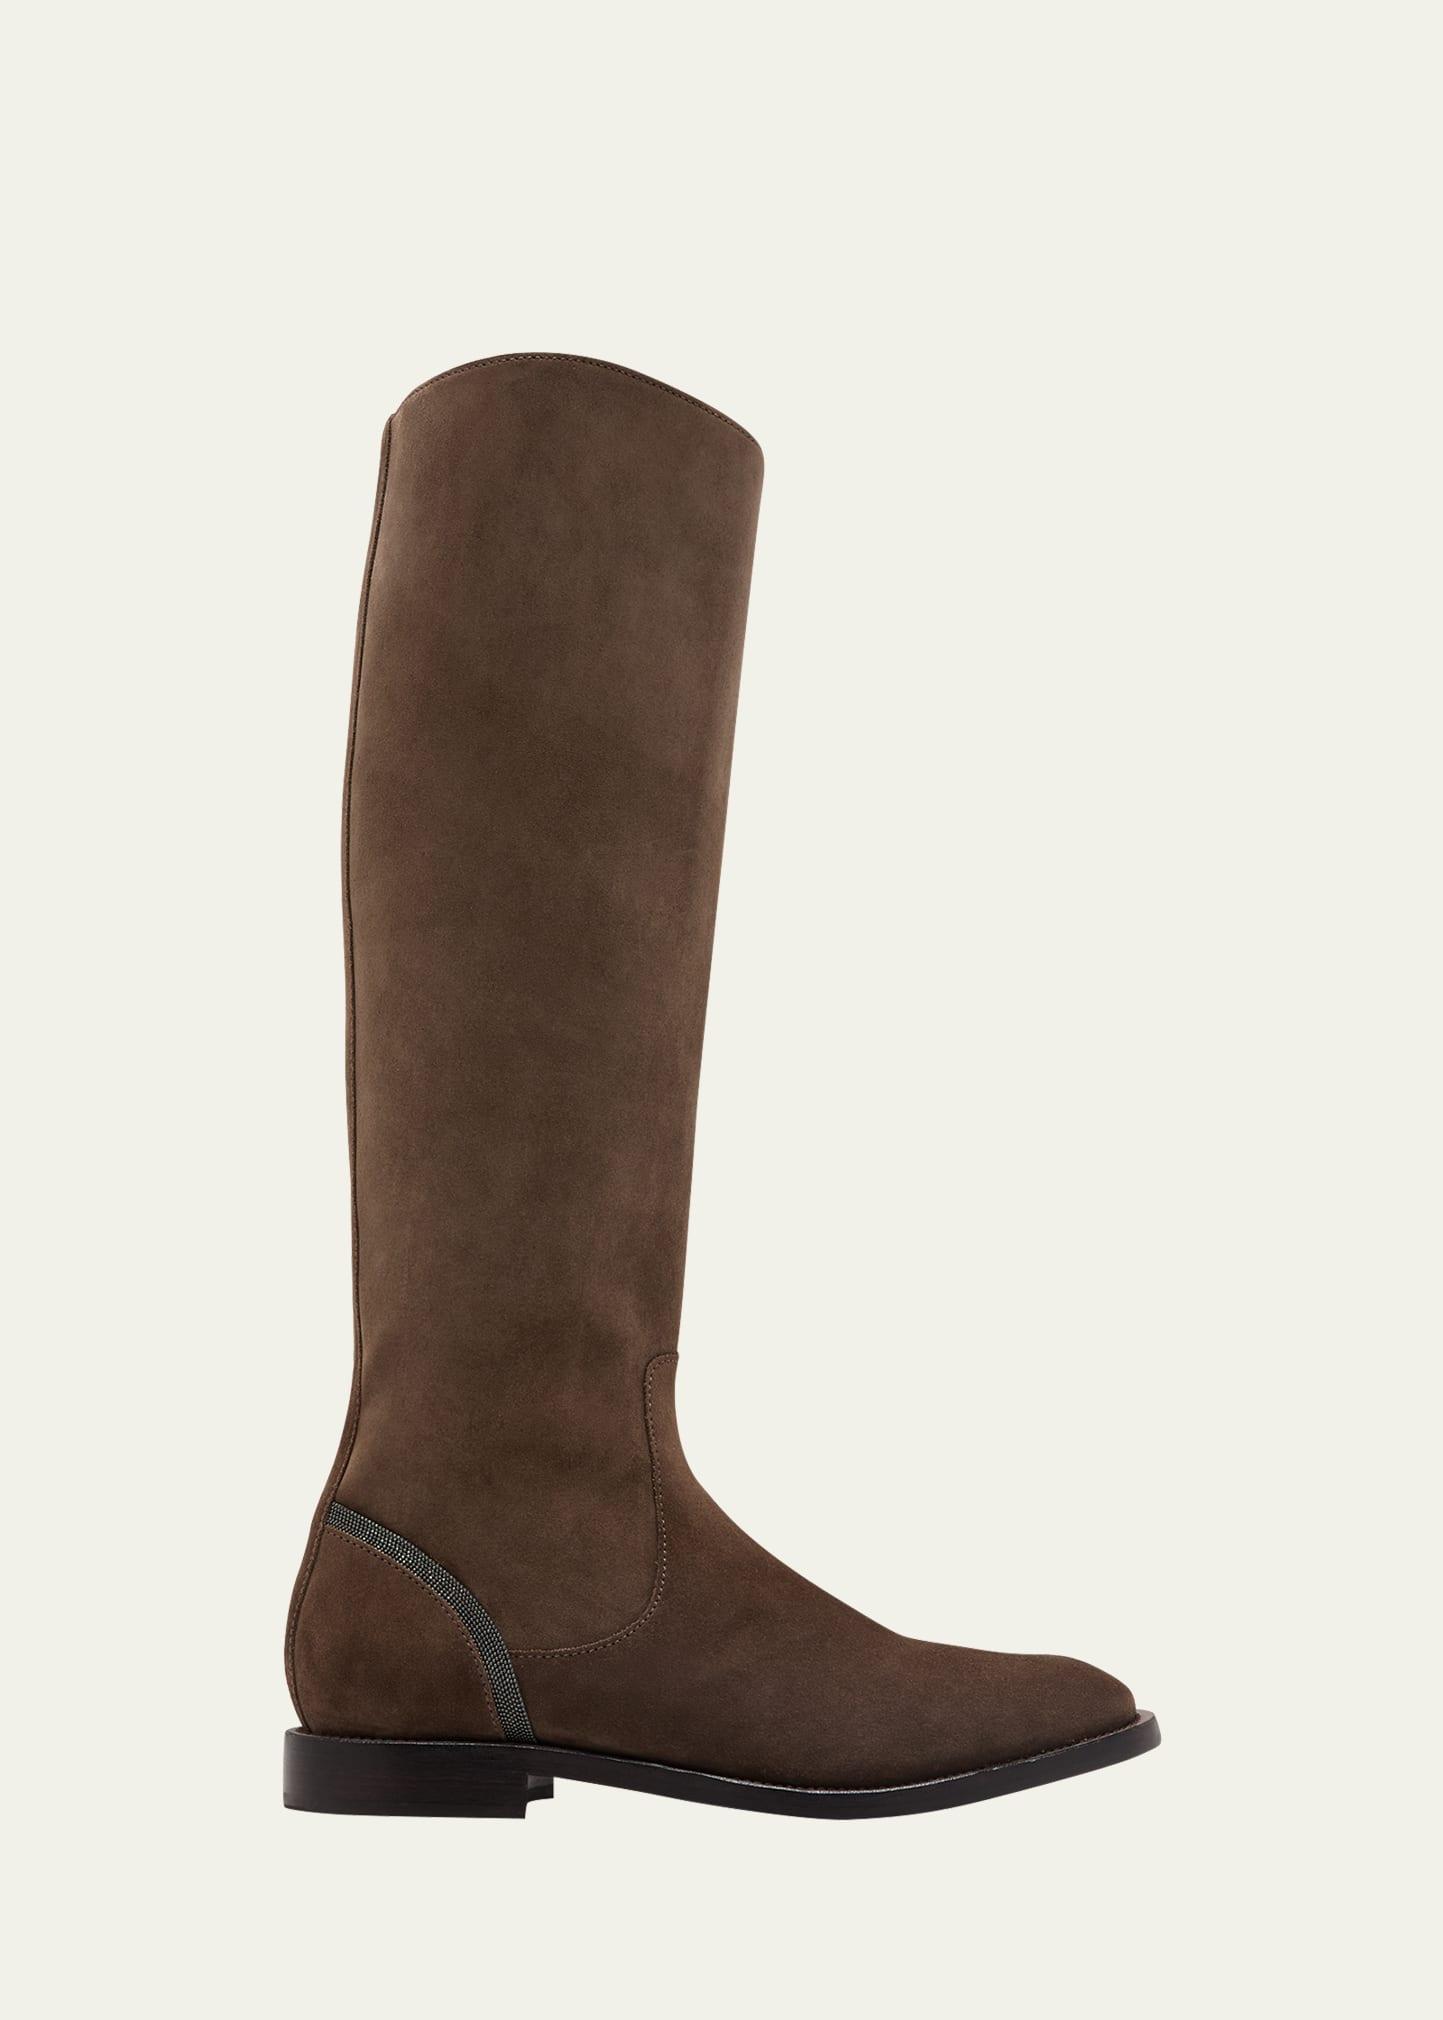 Womens Monili-Trimmed Suede Knee-High Boots Product Image